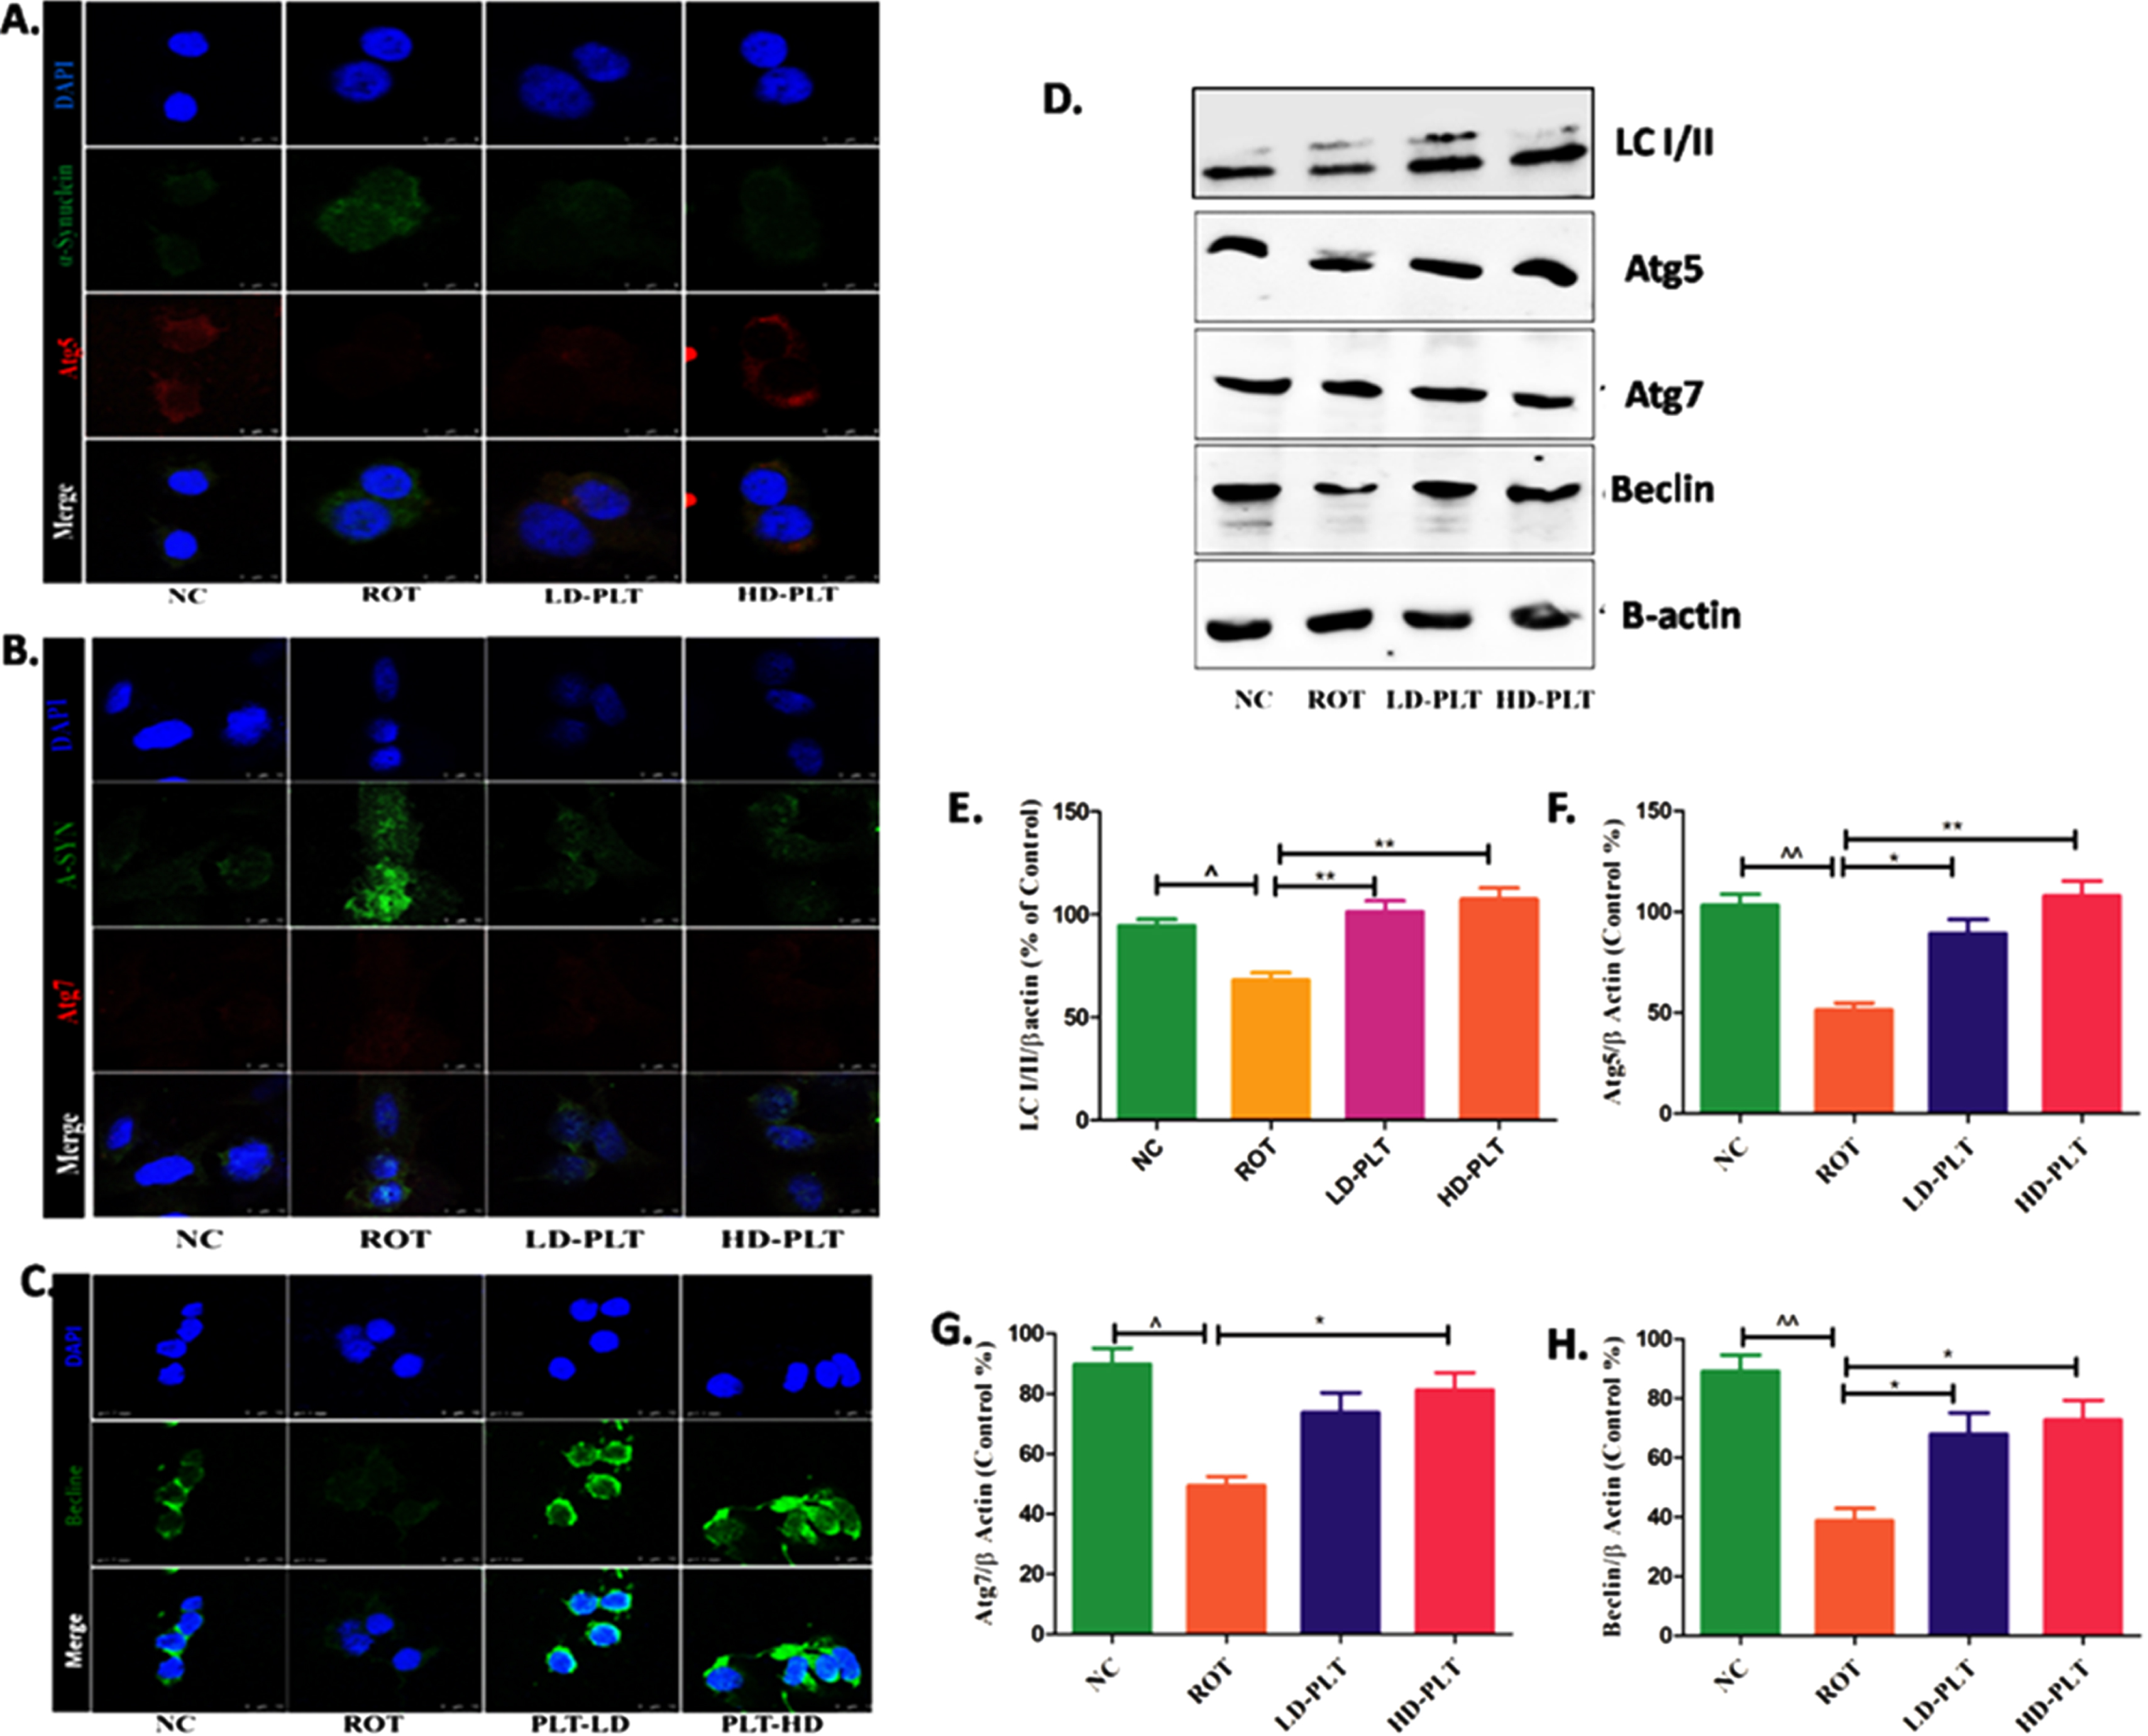 Effect of PLT exposure on autophagic proteins in ROT-exposed SH-SY5Y cells. Representative IF images of SH-SY5Y cells labeled with A) Atg-5, B) Atg-7, C) Beclin. D) Western blot image of LC3B-I/II, Atg-5, Atg-7, and Beclin in PLT and ROT exposed SH-SY5Ycells by western blotting. Quantitative densitometric analysis of E) LC3B I/II, F) Atg-5, G) Atg-7, and H) Beclin using Image J software. The results obtained are represented as mean±SEM (n = 3). ***p < 0.001, **p < 0.01 and *p < 0.05 versus ROT, ∧∧p < 0.01 and ∧p < 0.05 versus ROT.